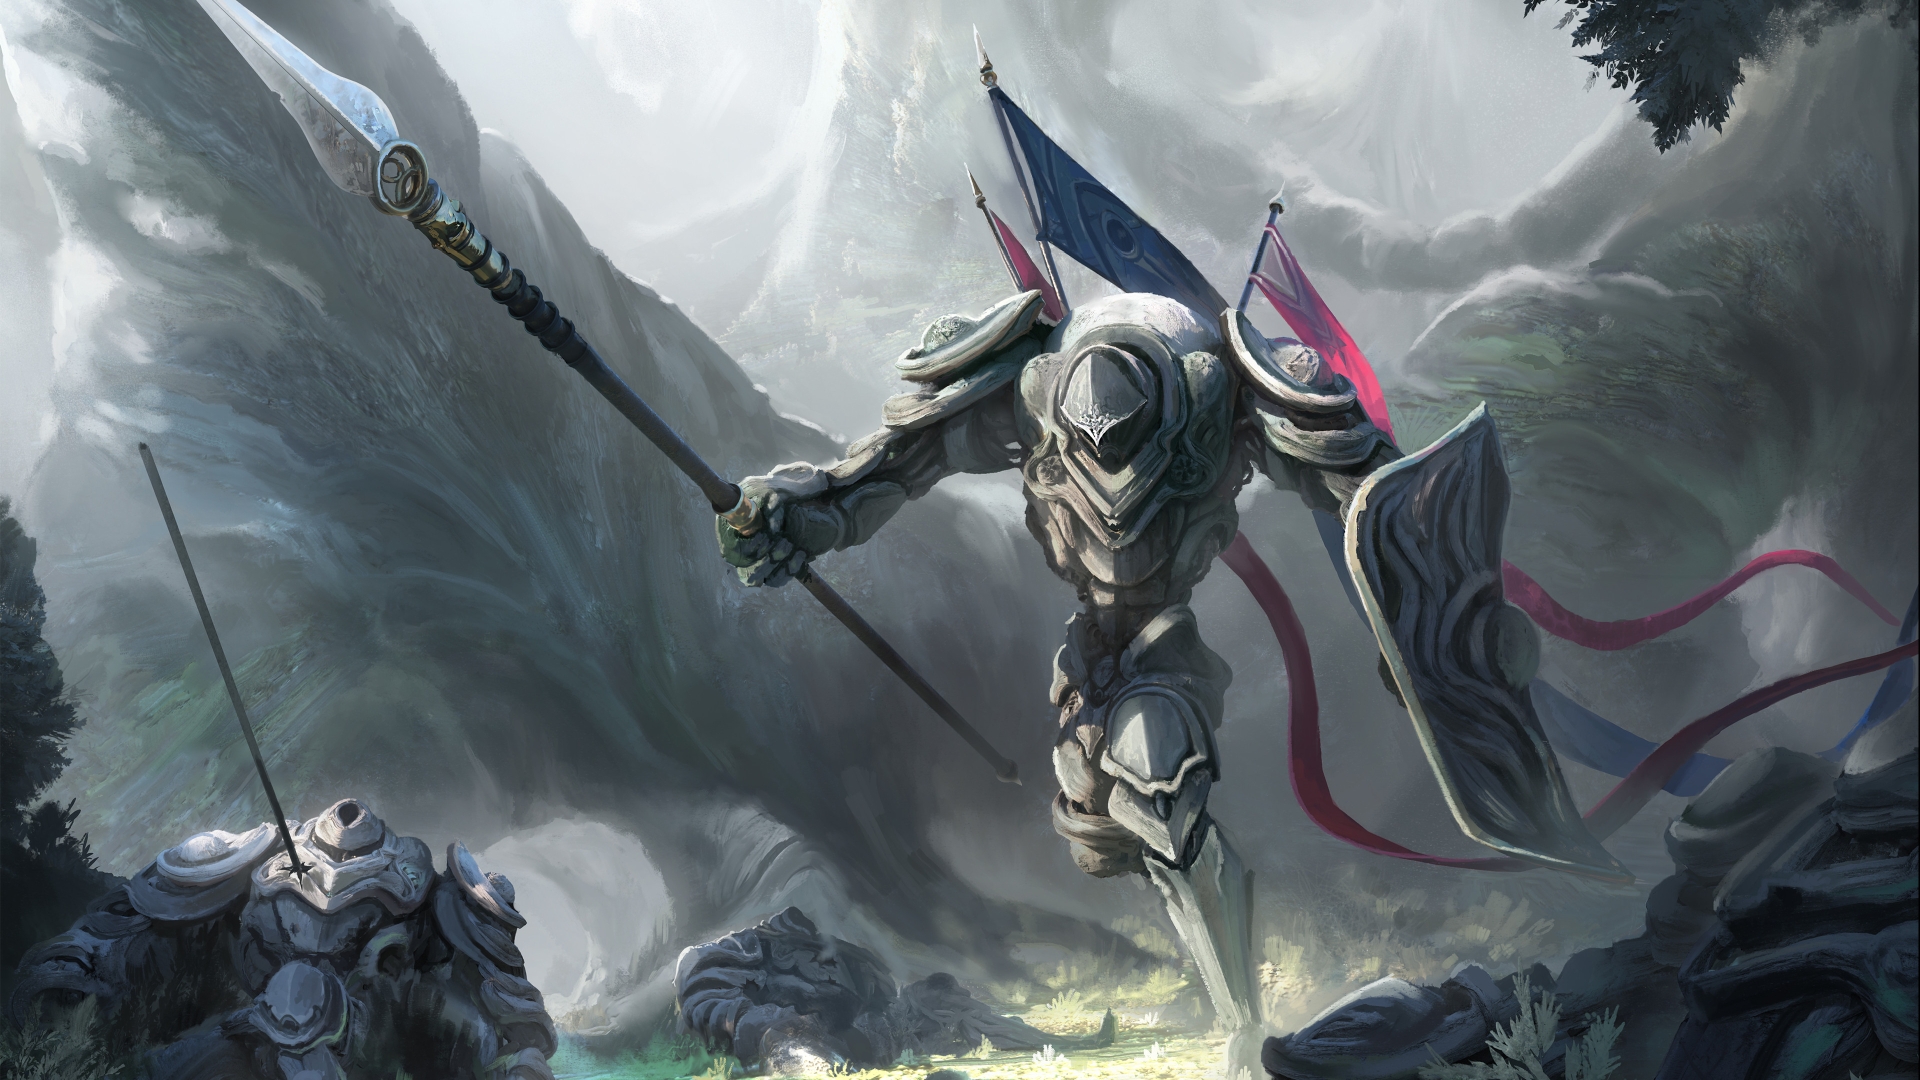  Magic: The Gathering gets mechs in the new Brothers' War set 